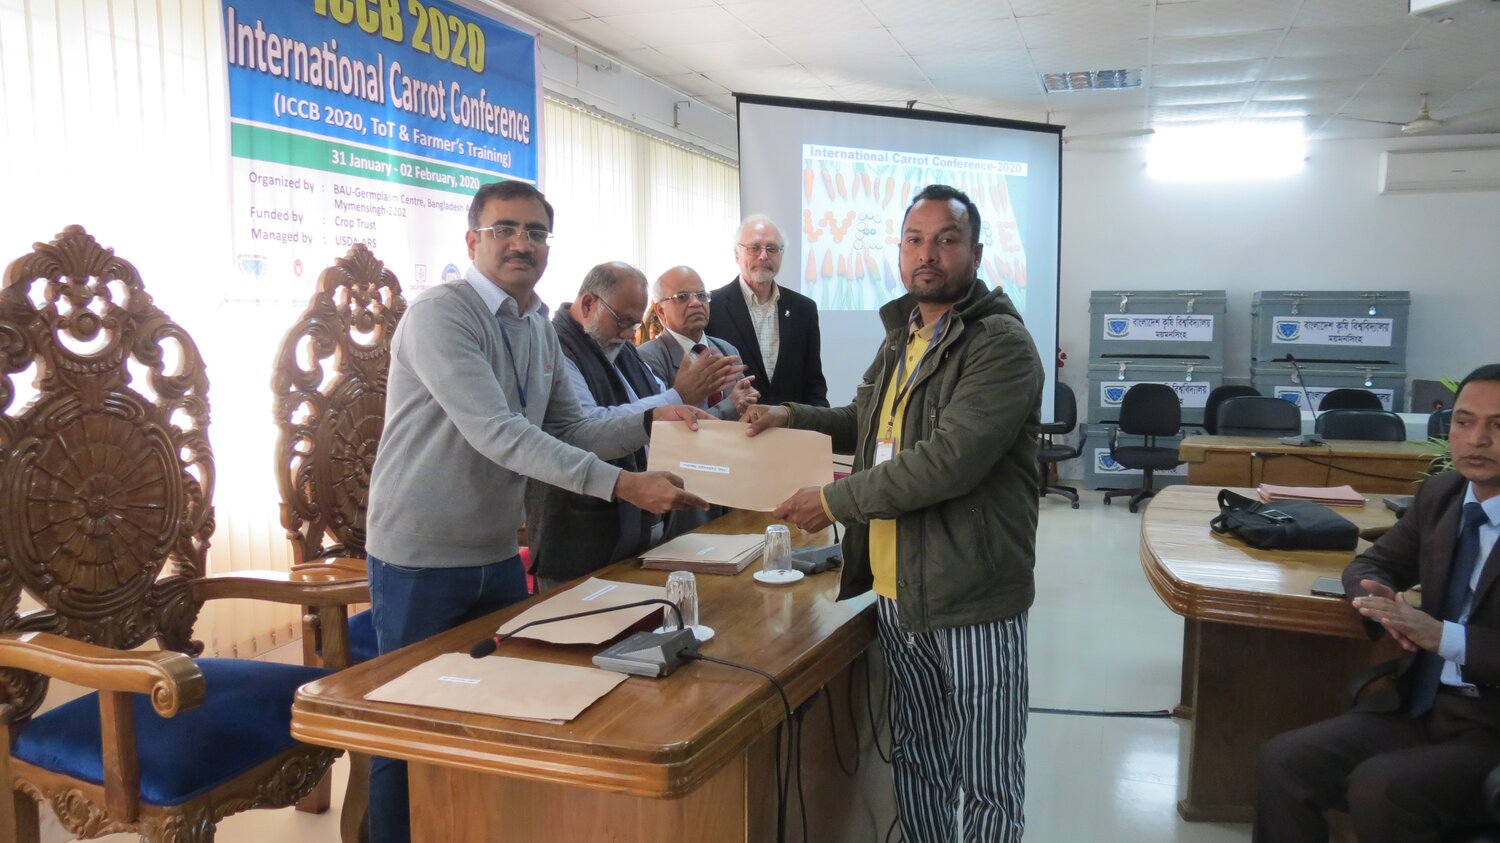 Ravishankar Manickam (left), from the World Vegetable Center, awards a certificate to a participant who, back in February 2020, successfully completed the training-the-trainers course.